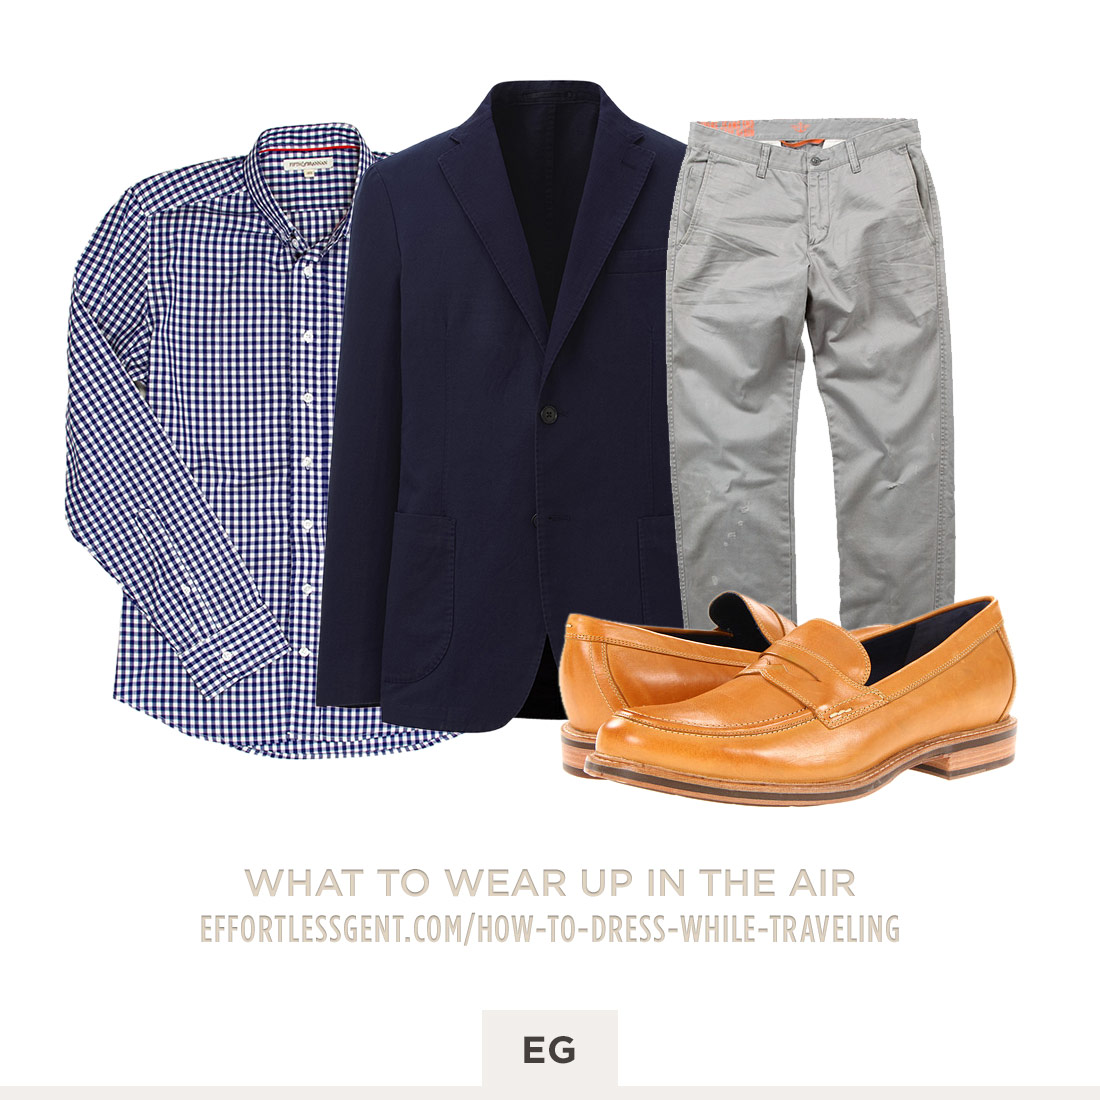 The Perfect Travel Outfit: How To Dress While Traveling, Effortless Gent